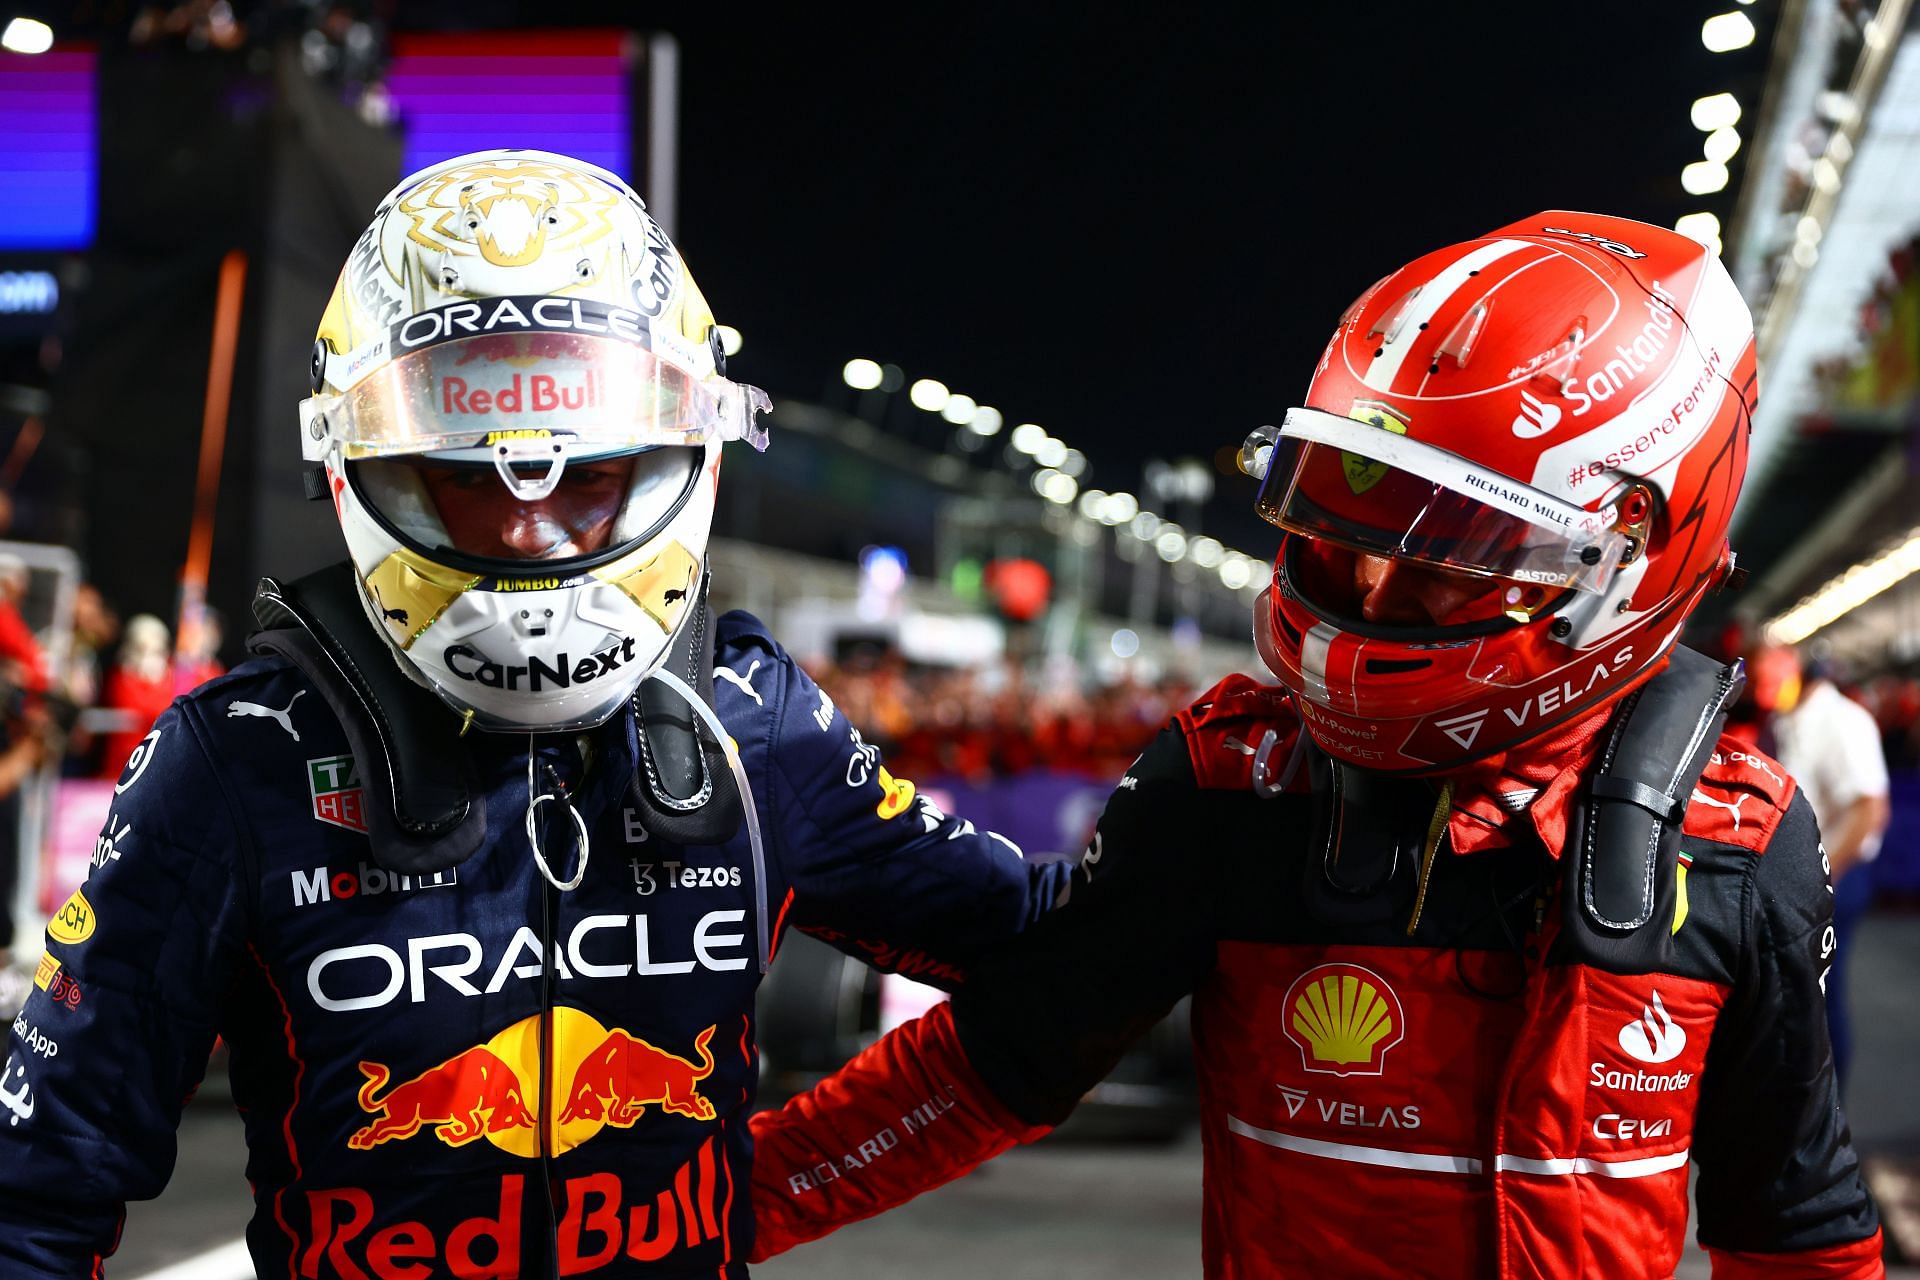 The title battle between Charles Leclerc (right) and Max Verstappen (left) signifies the next generation taking over from the old guard